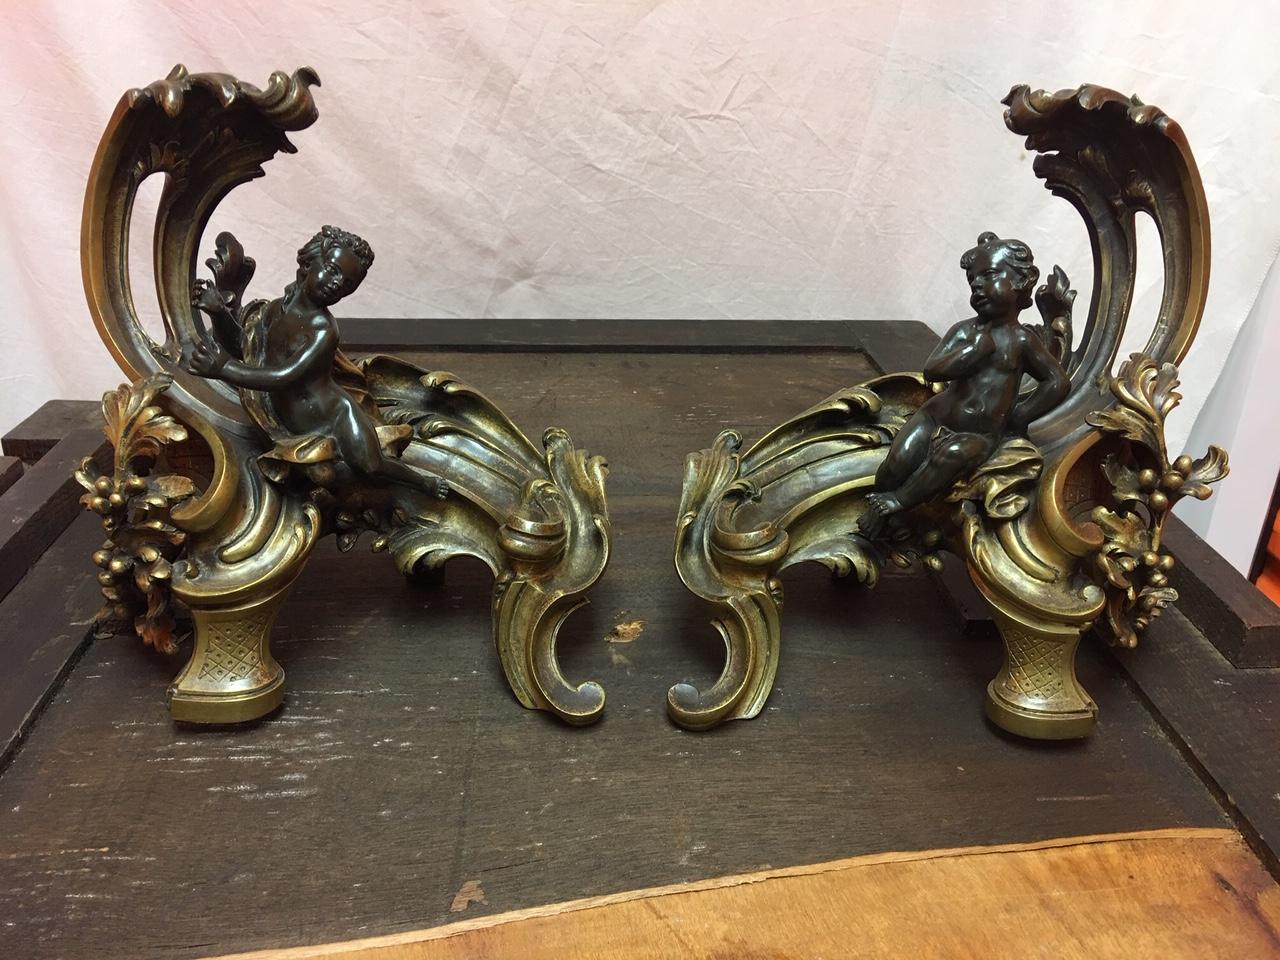 Pair of French acanthus leaves figural cherub chenets, 19th century.